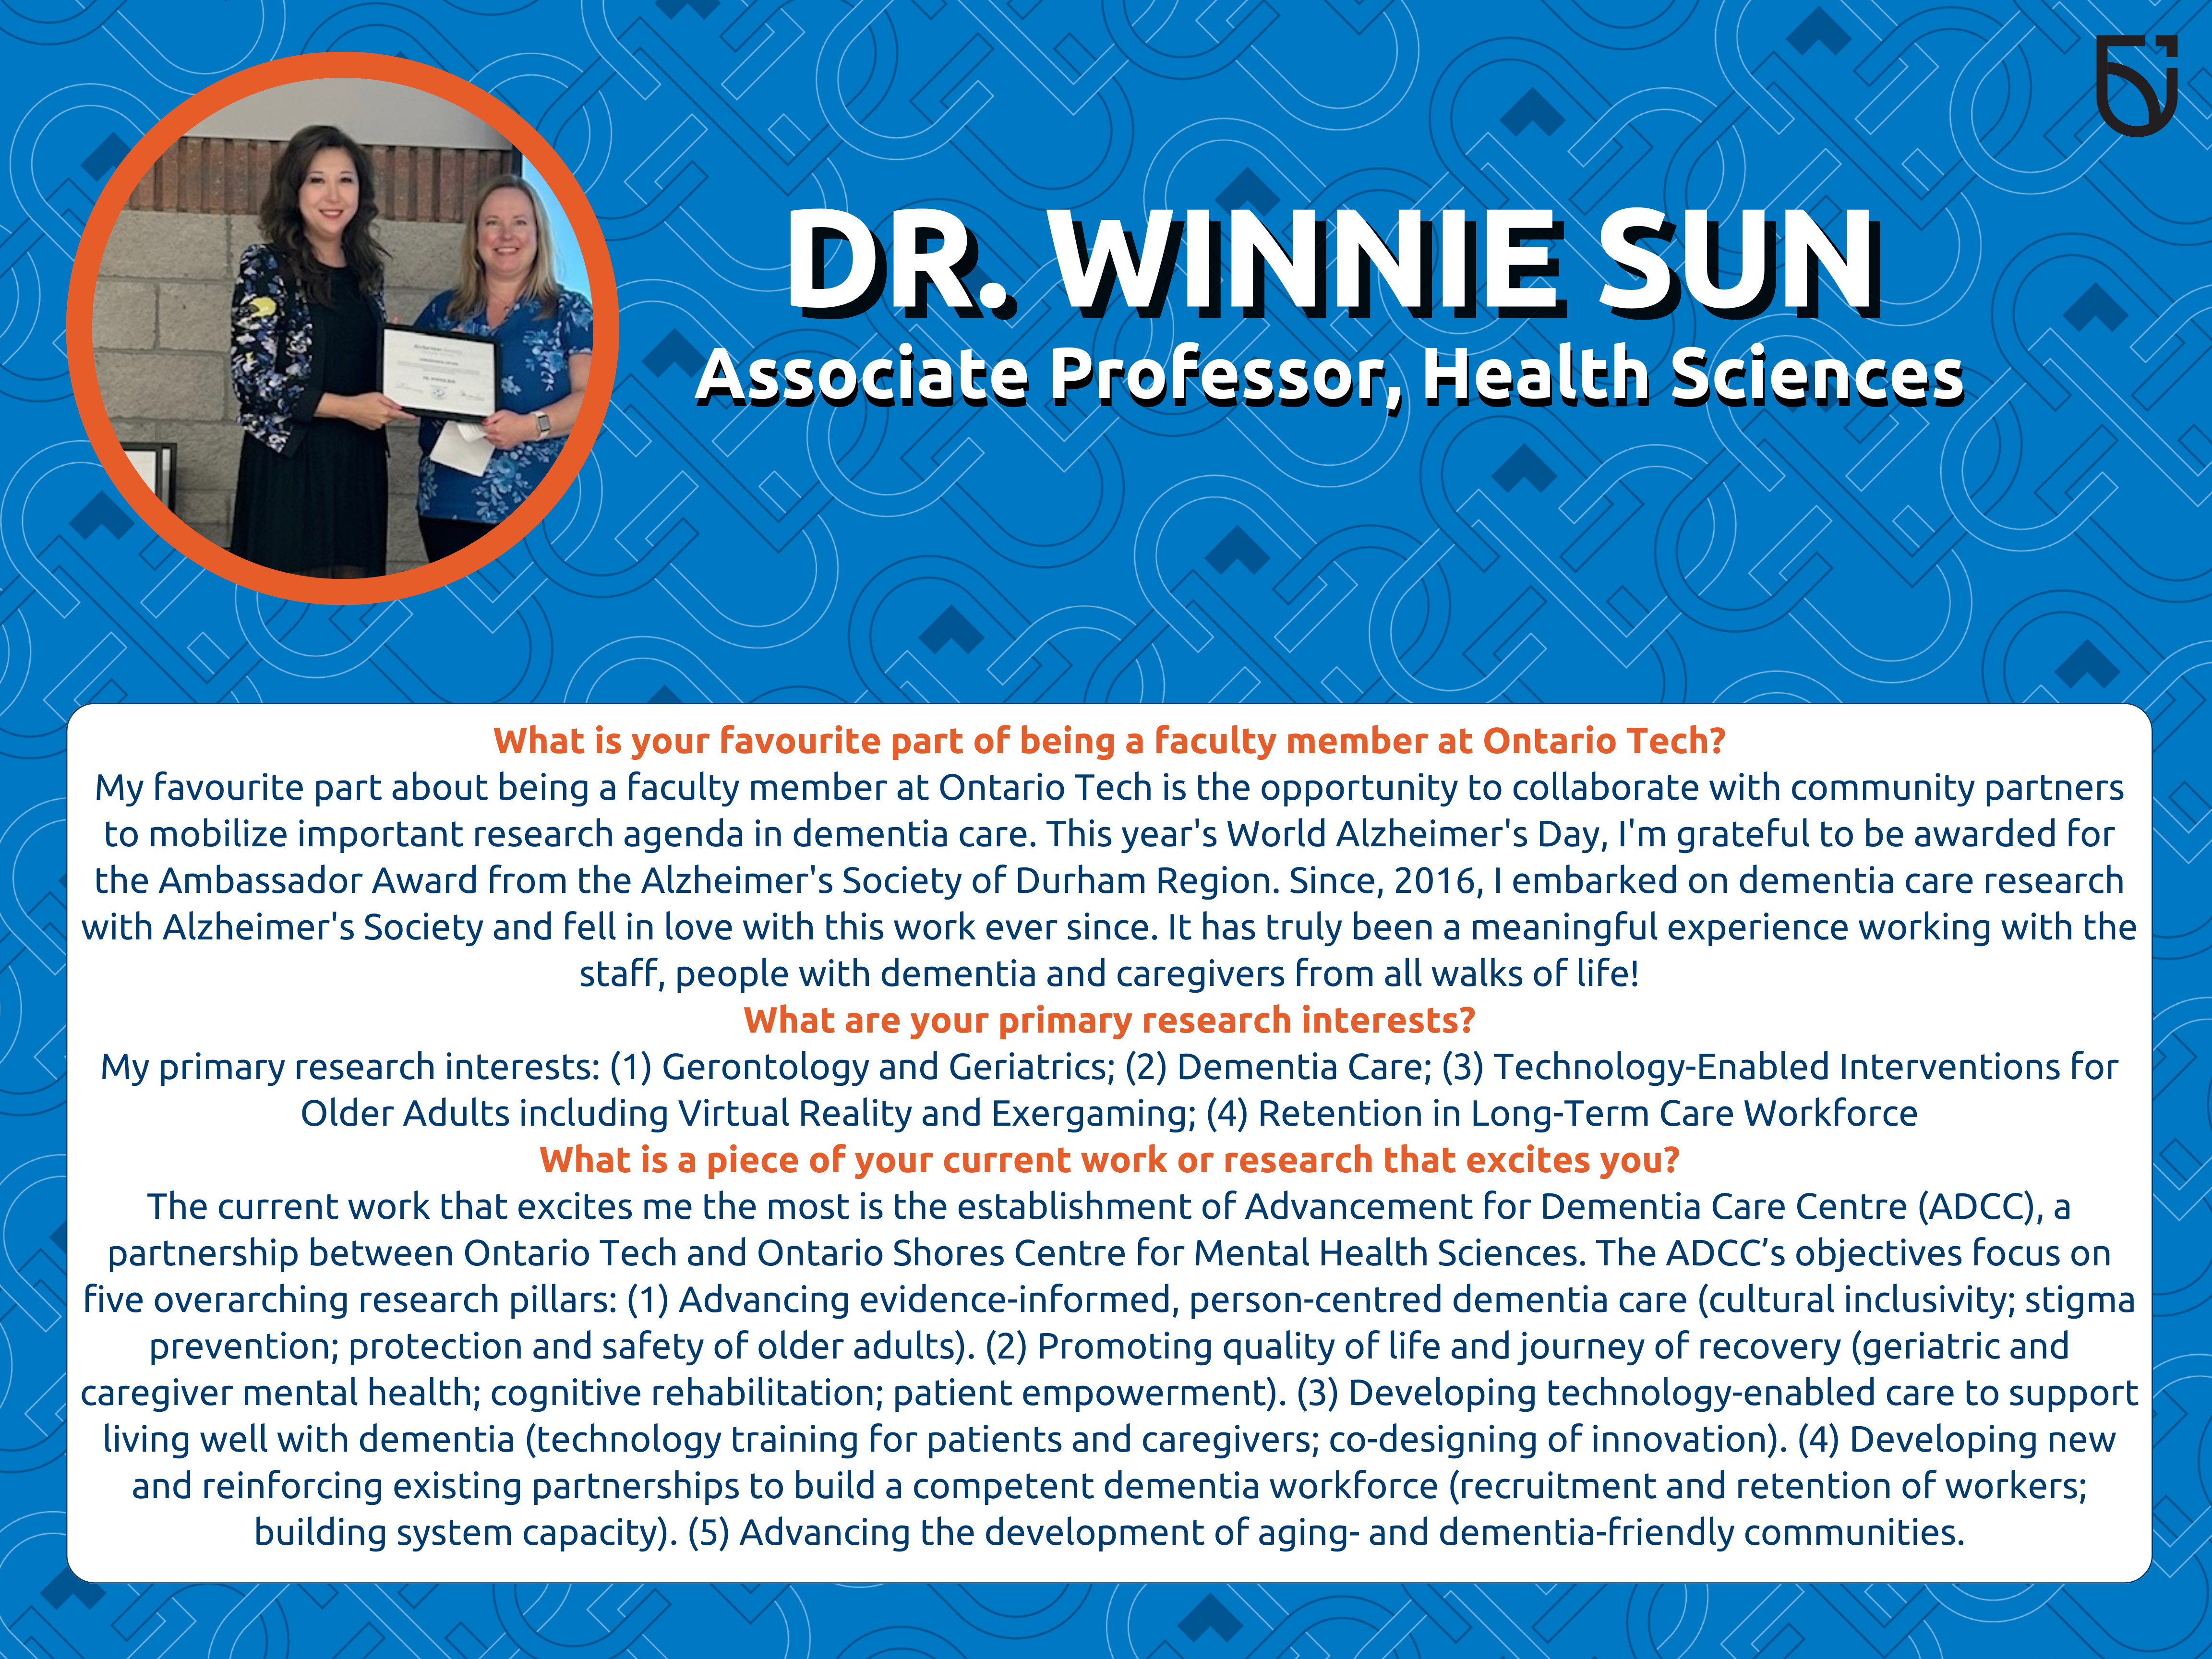 This photo is a Women’s Wednesday feature of Dr. Winnie Sun, an Associate Professor in the Faculty of Health Sciences